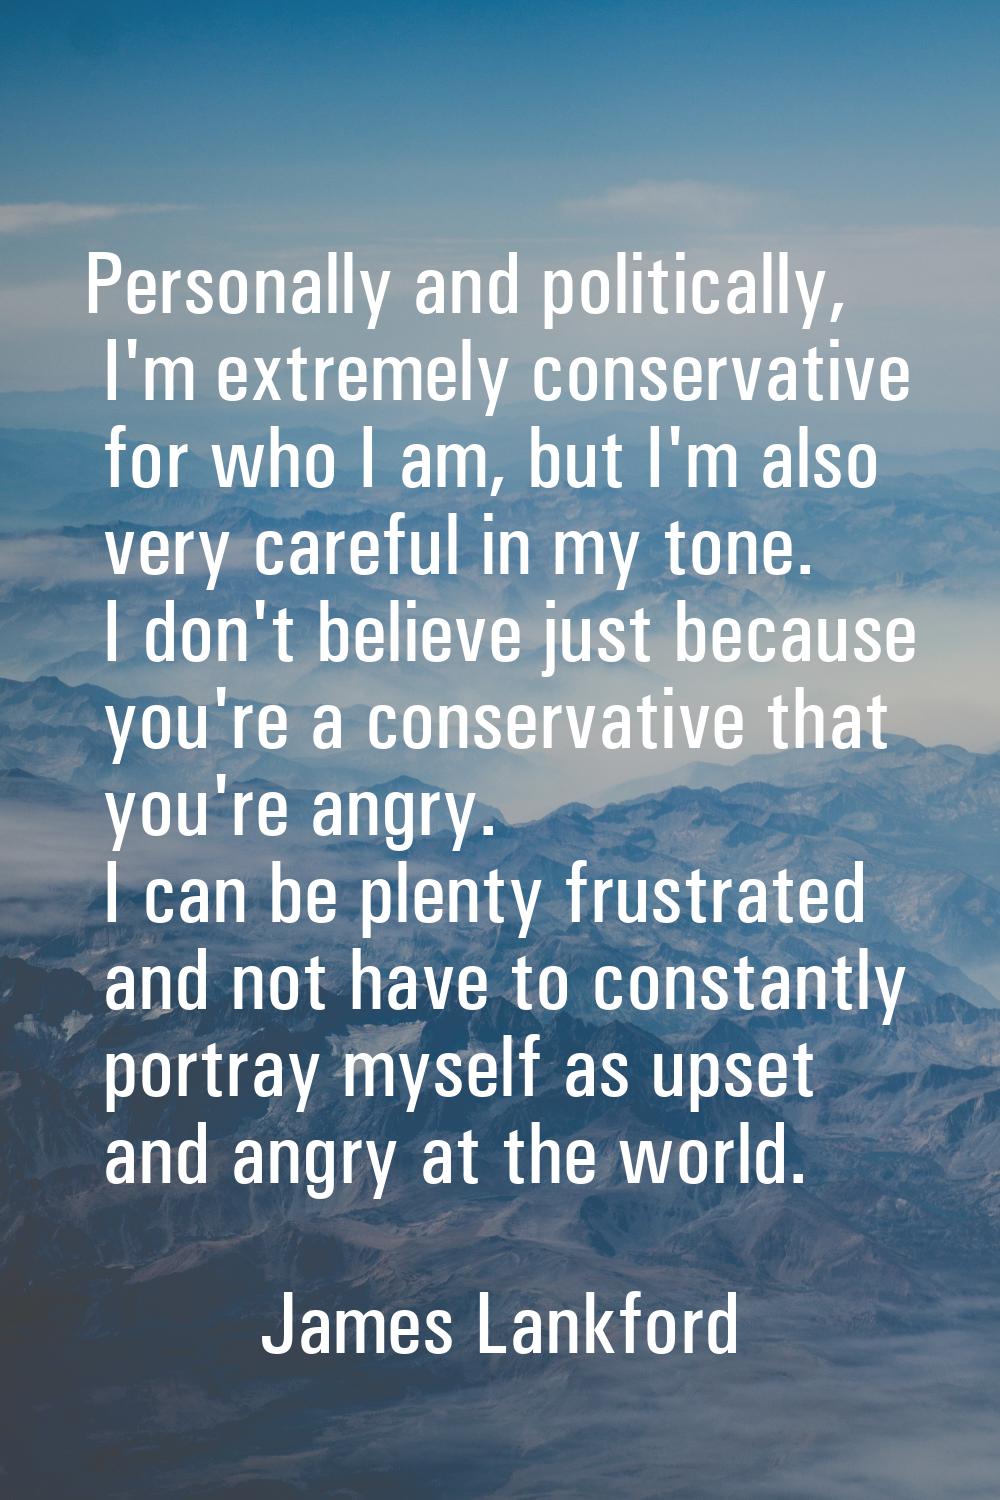 Personally and politically, I'm extremely conservative for who I am, but I'm also very careful in m